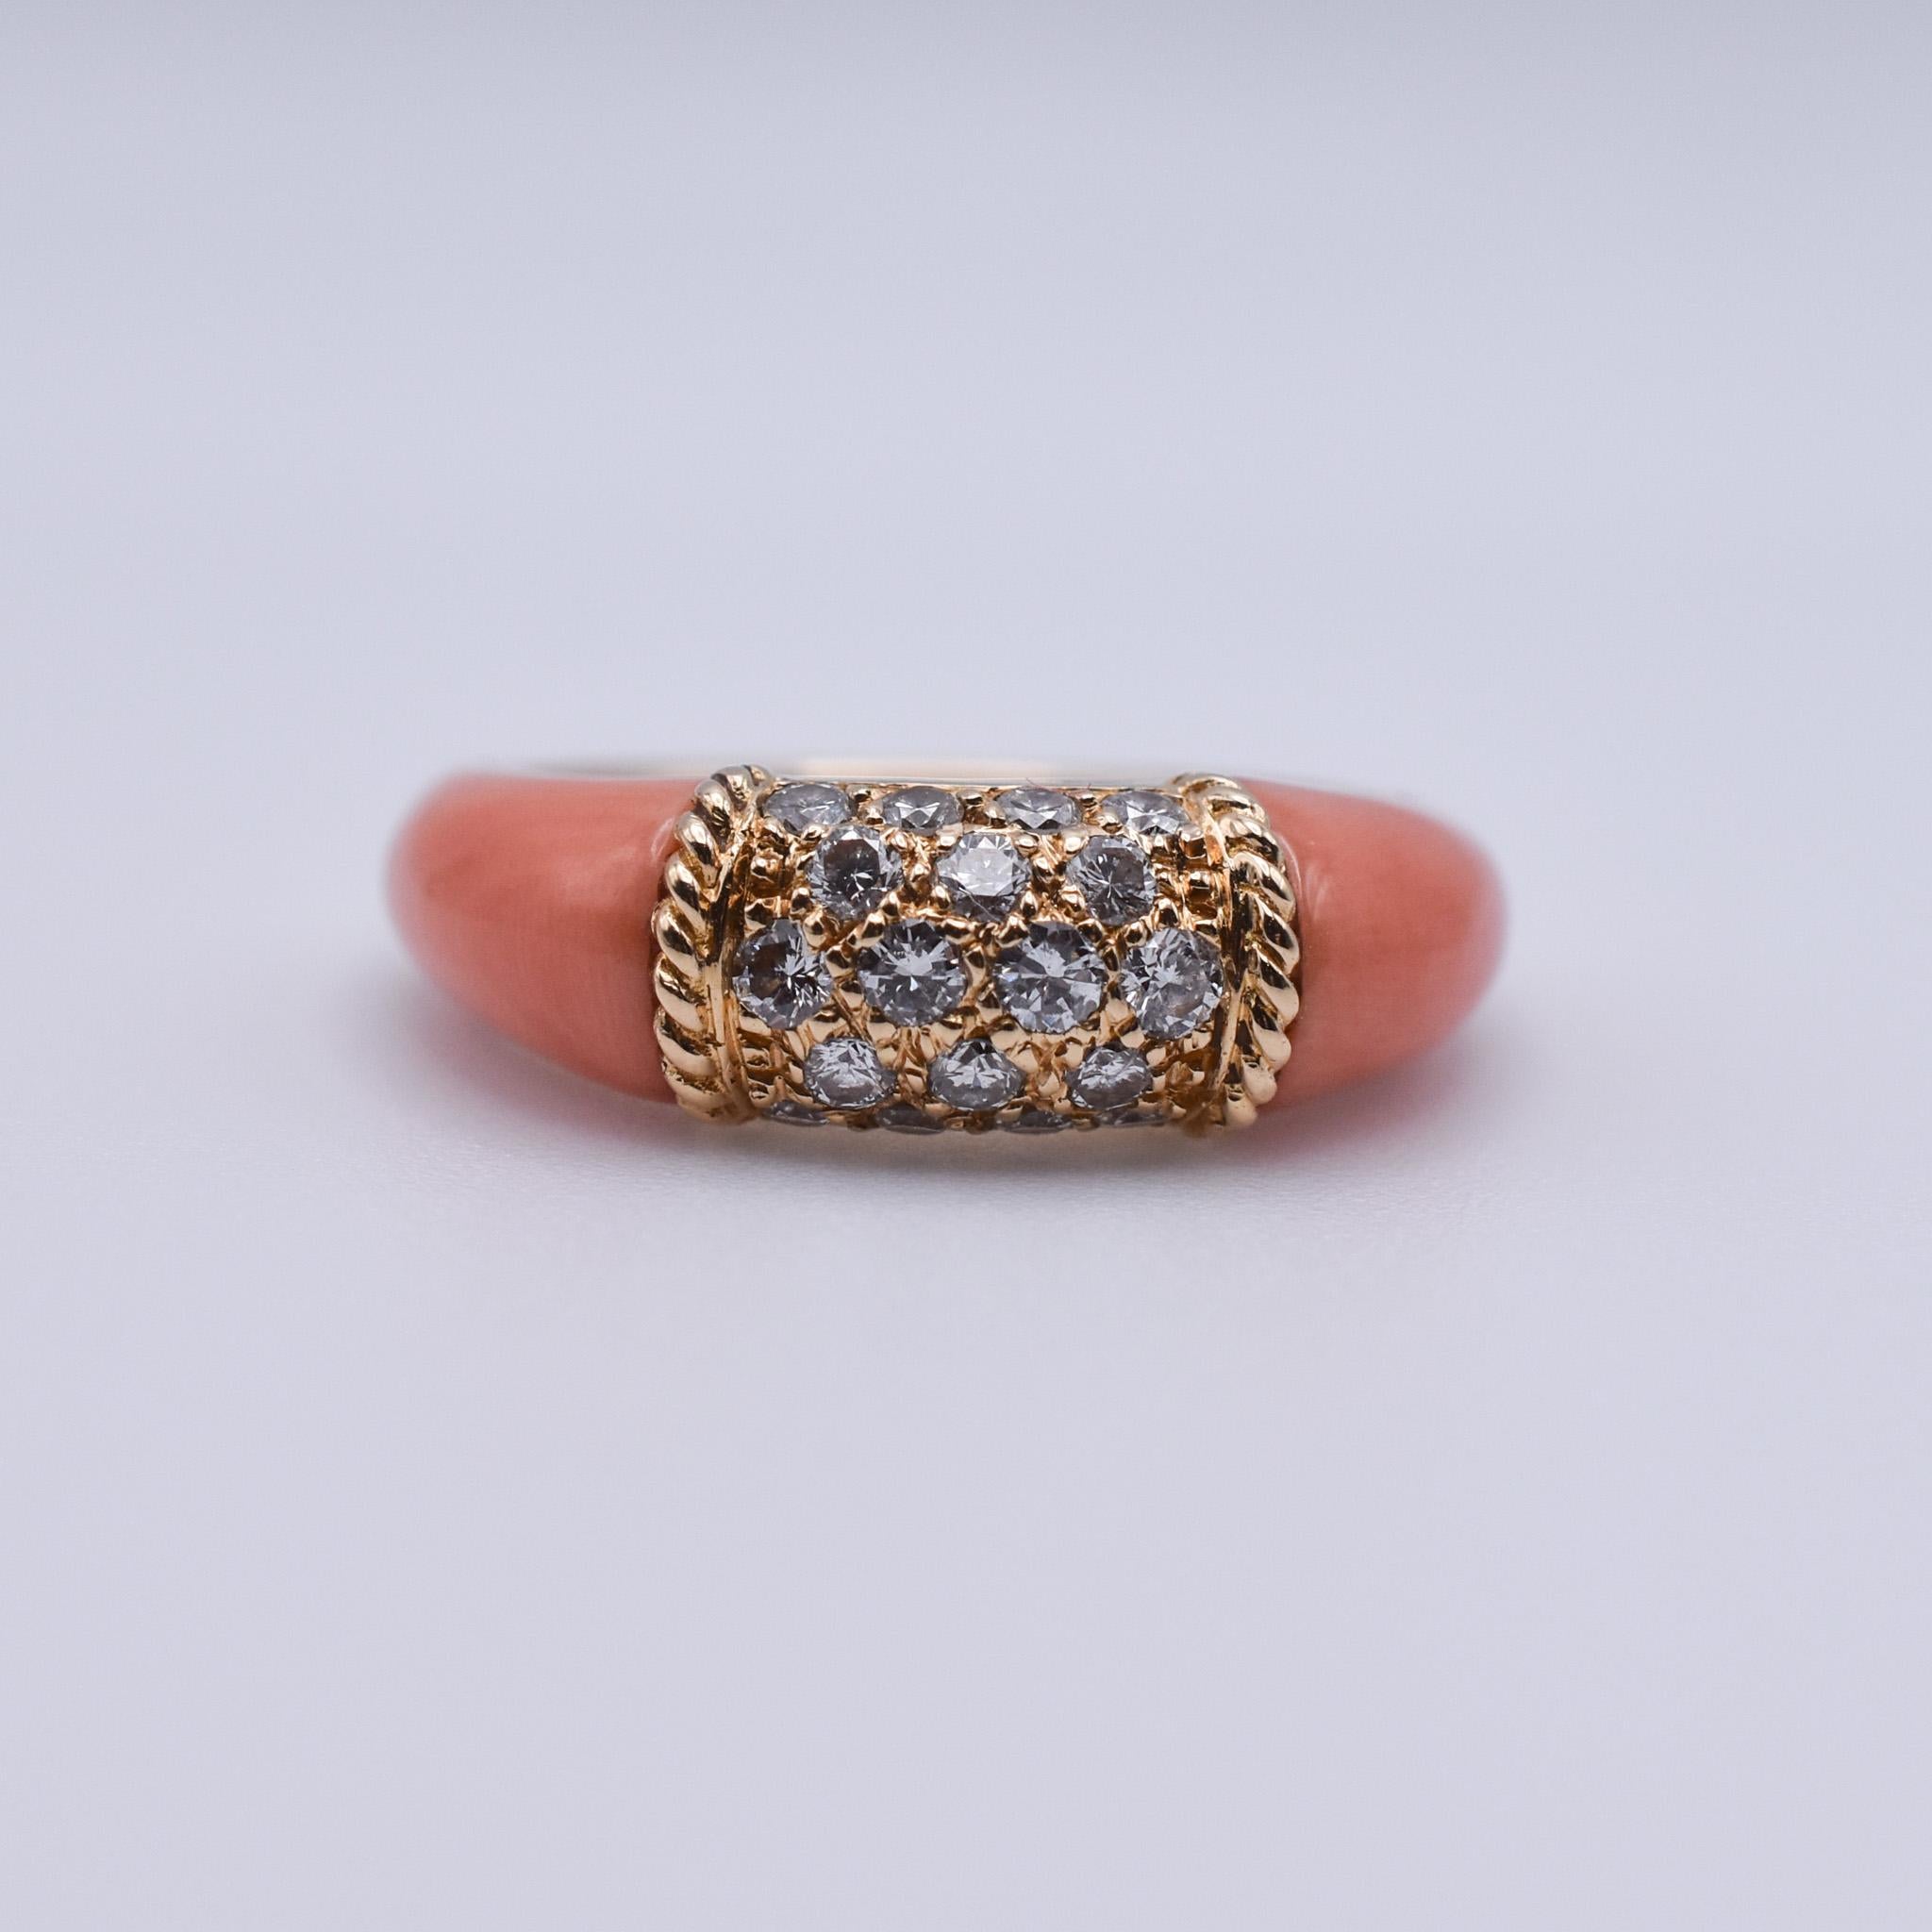 An exquisite Coral and Diamond Ring by Van Cleef & Arpels from the 